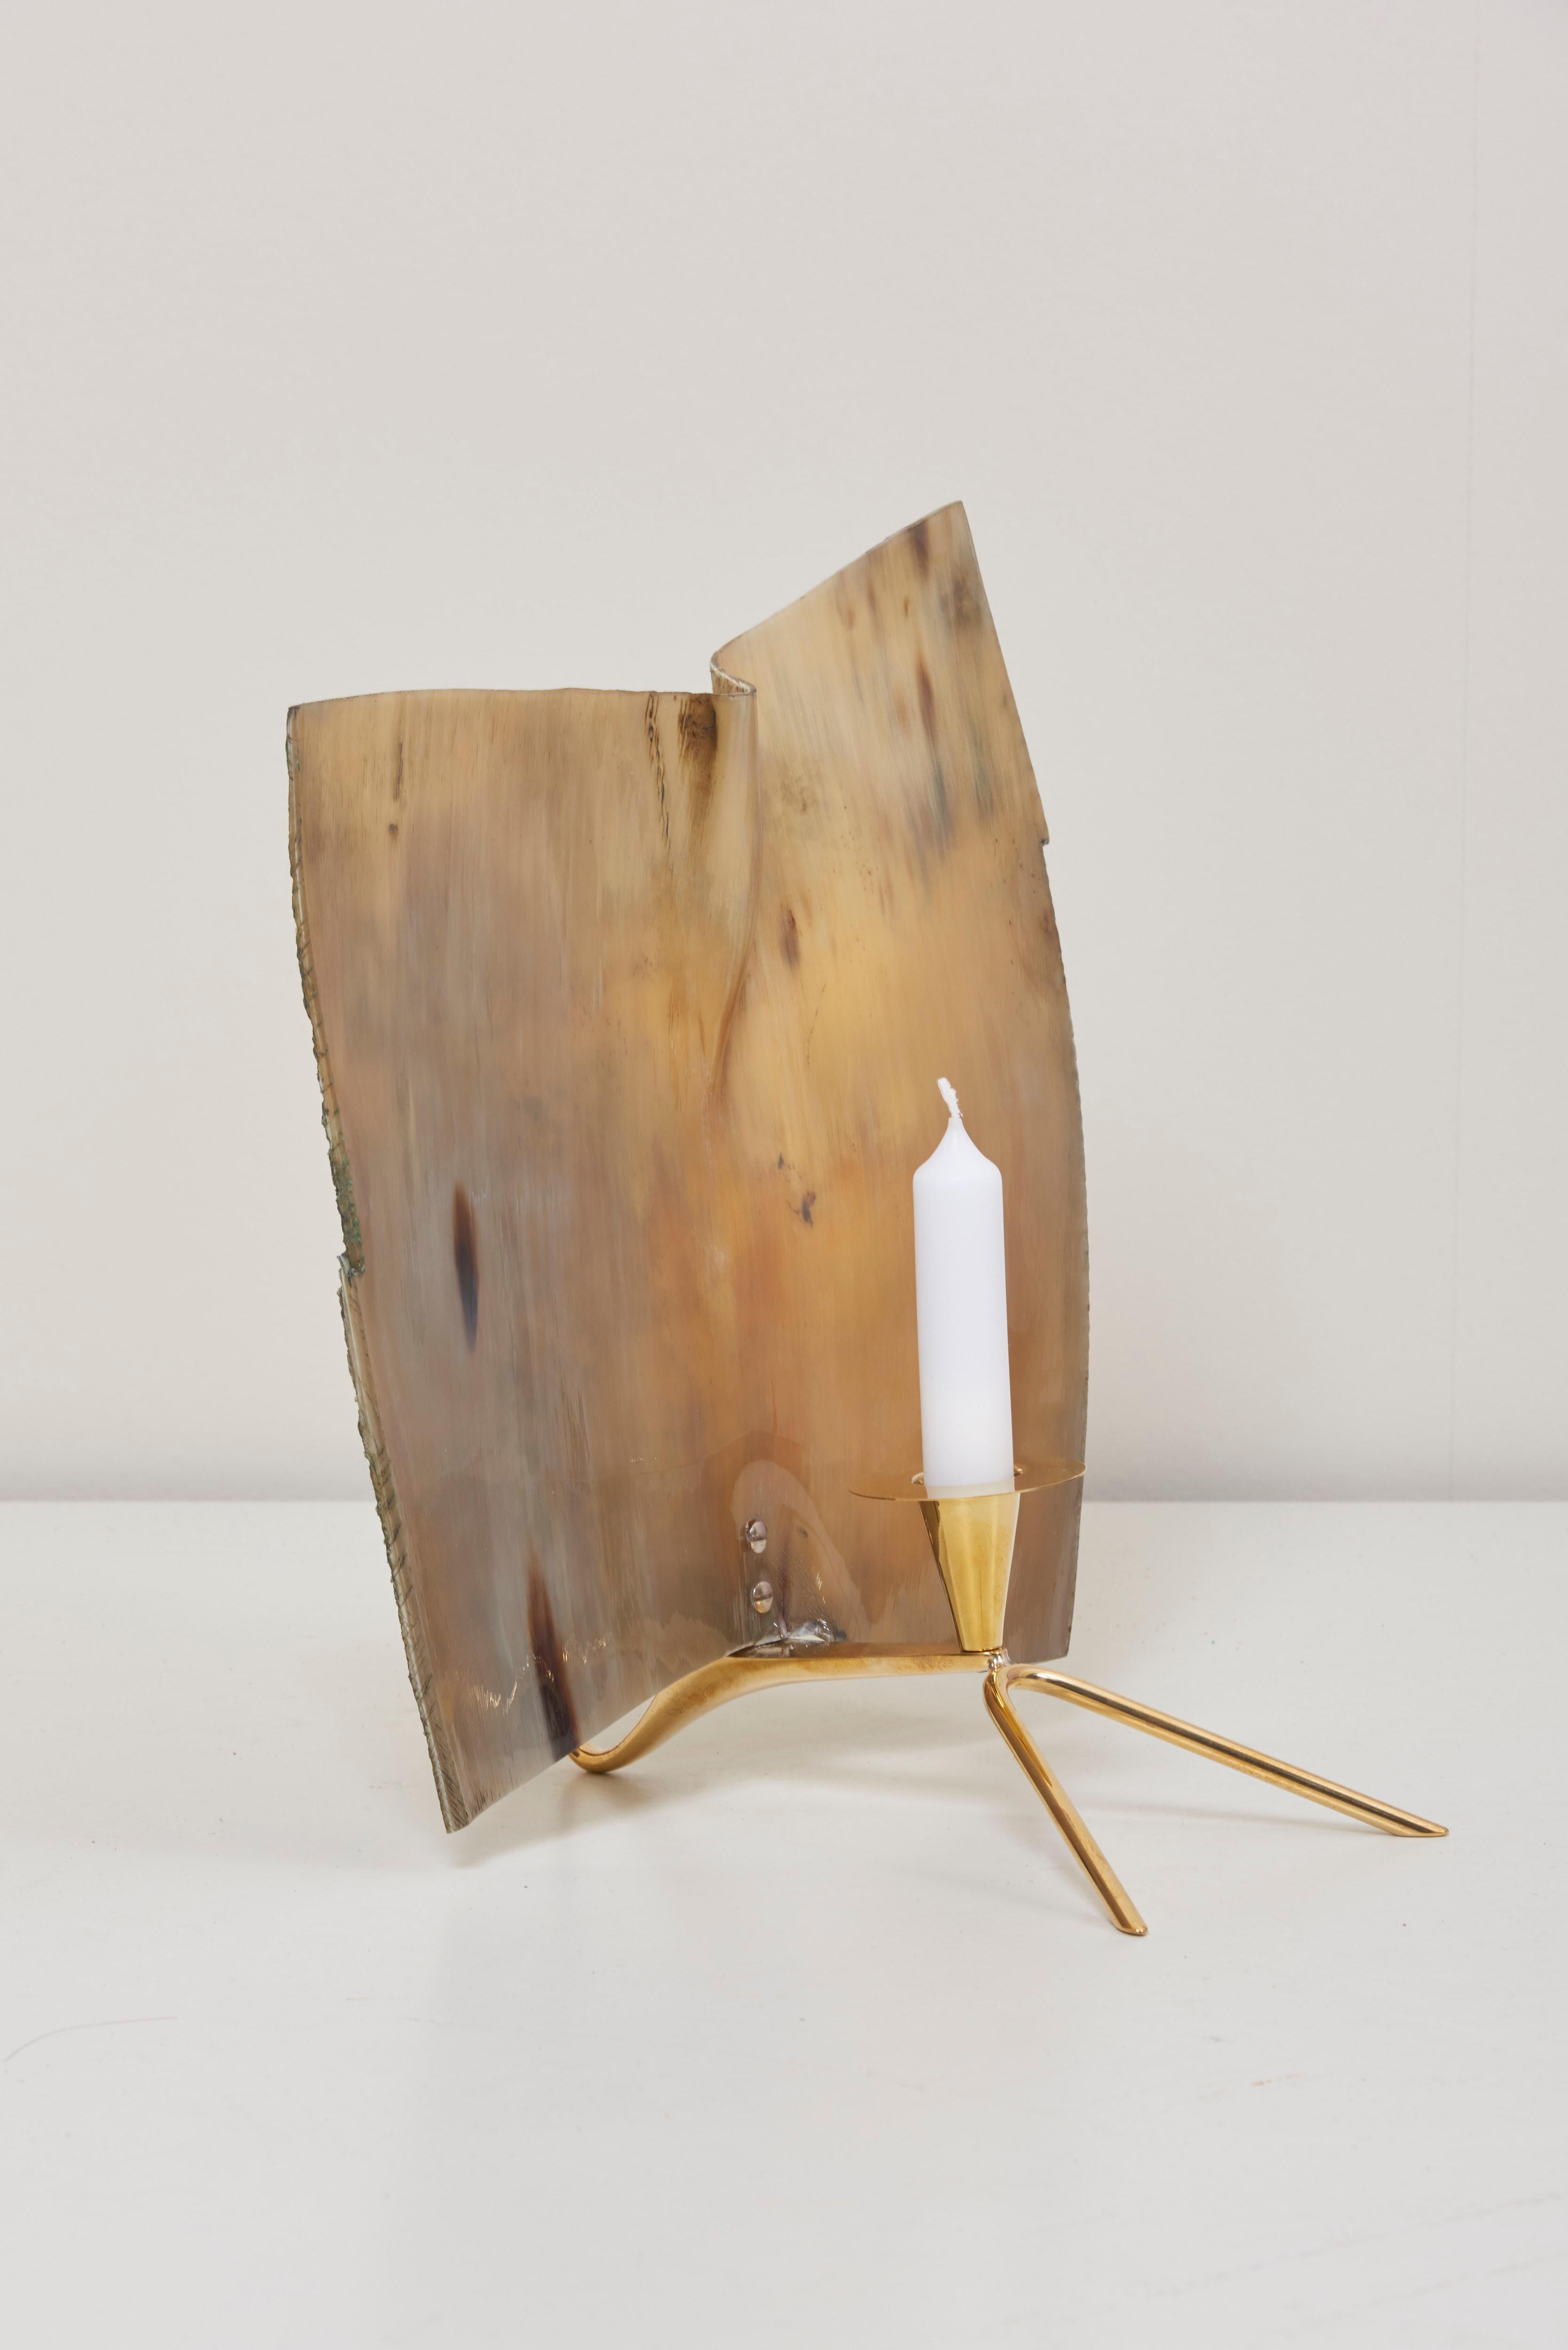 Unusual large horn shade on this classic Carl Auböck candle holder in polished solid brass.

